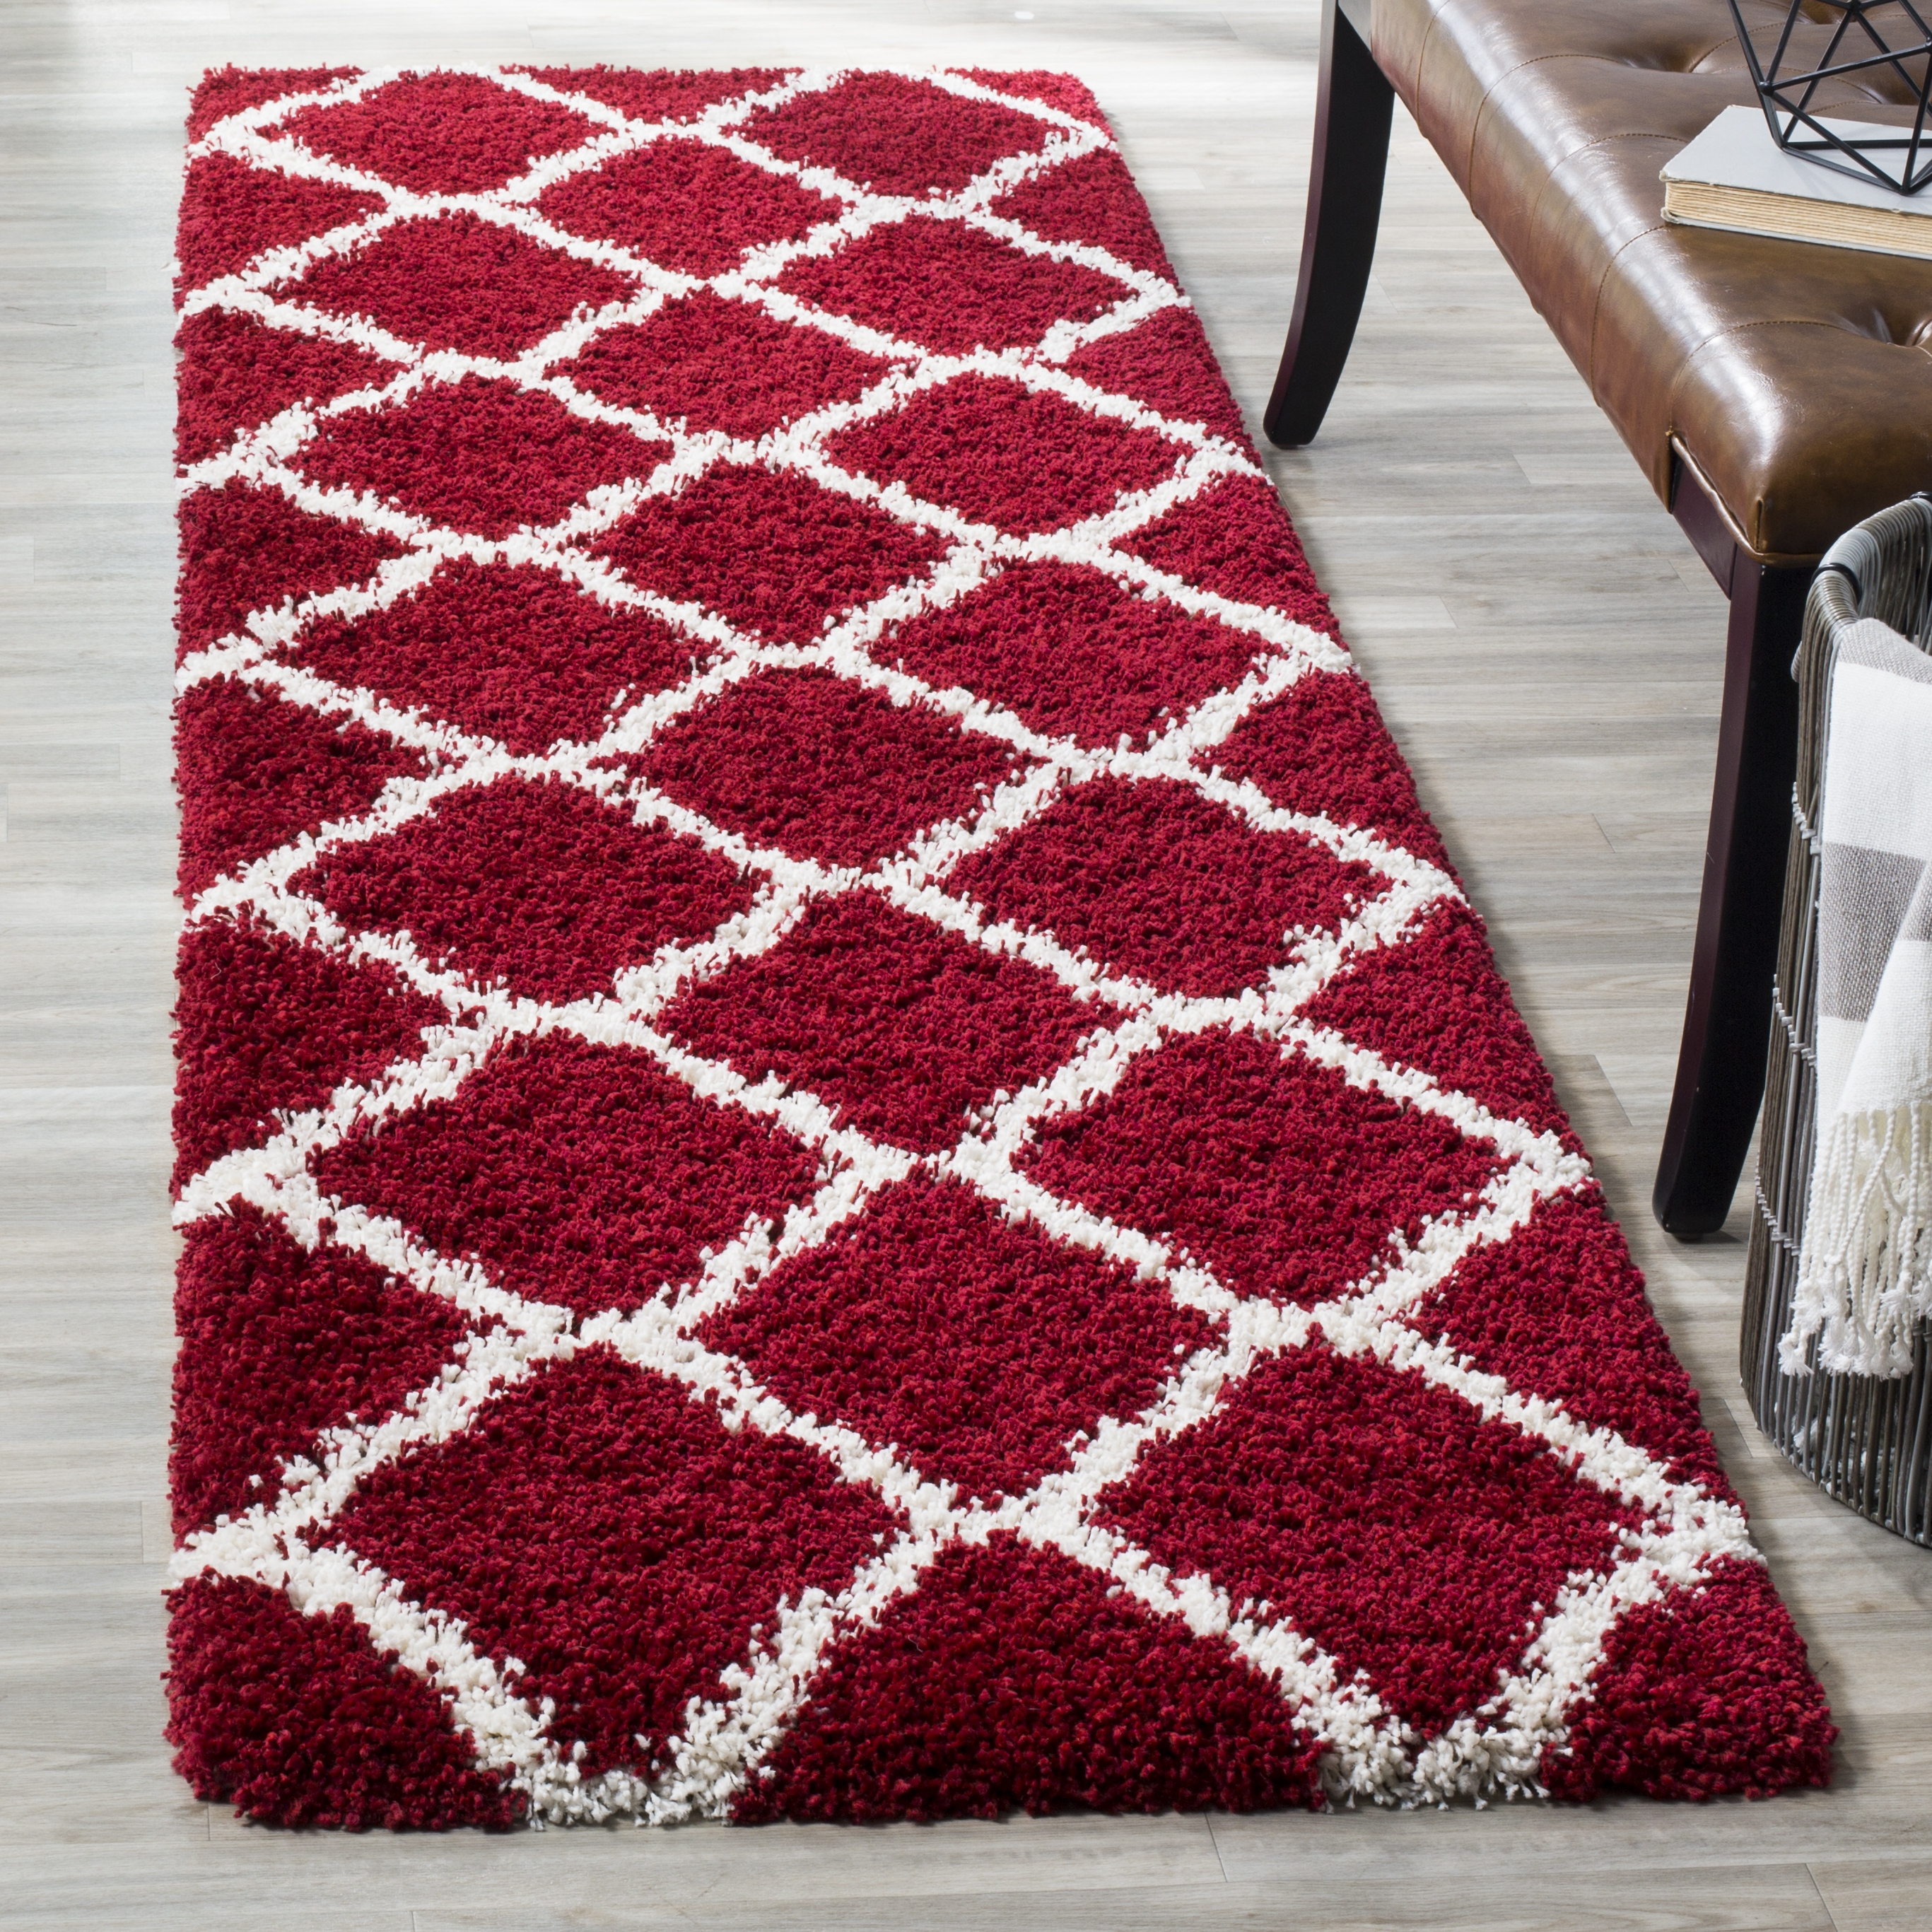 Arlo Home Woven Area Rug, SGH283R, Red/Ivory,  2' 3" X 8' - Image 1